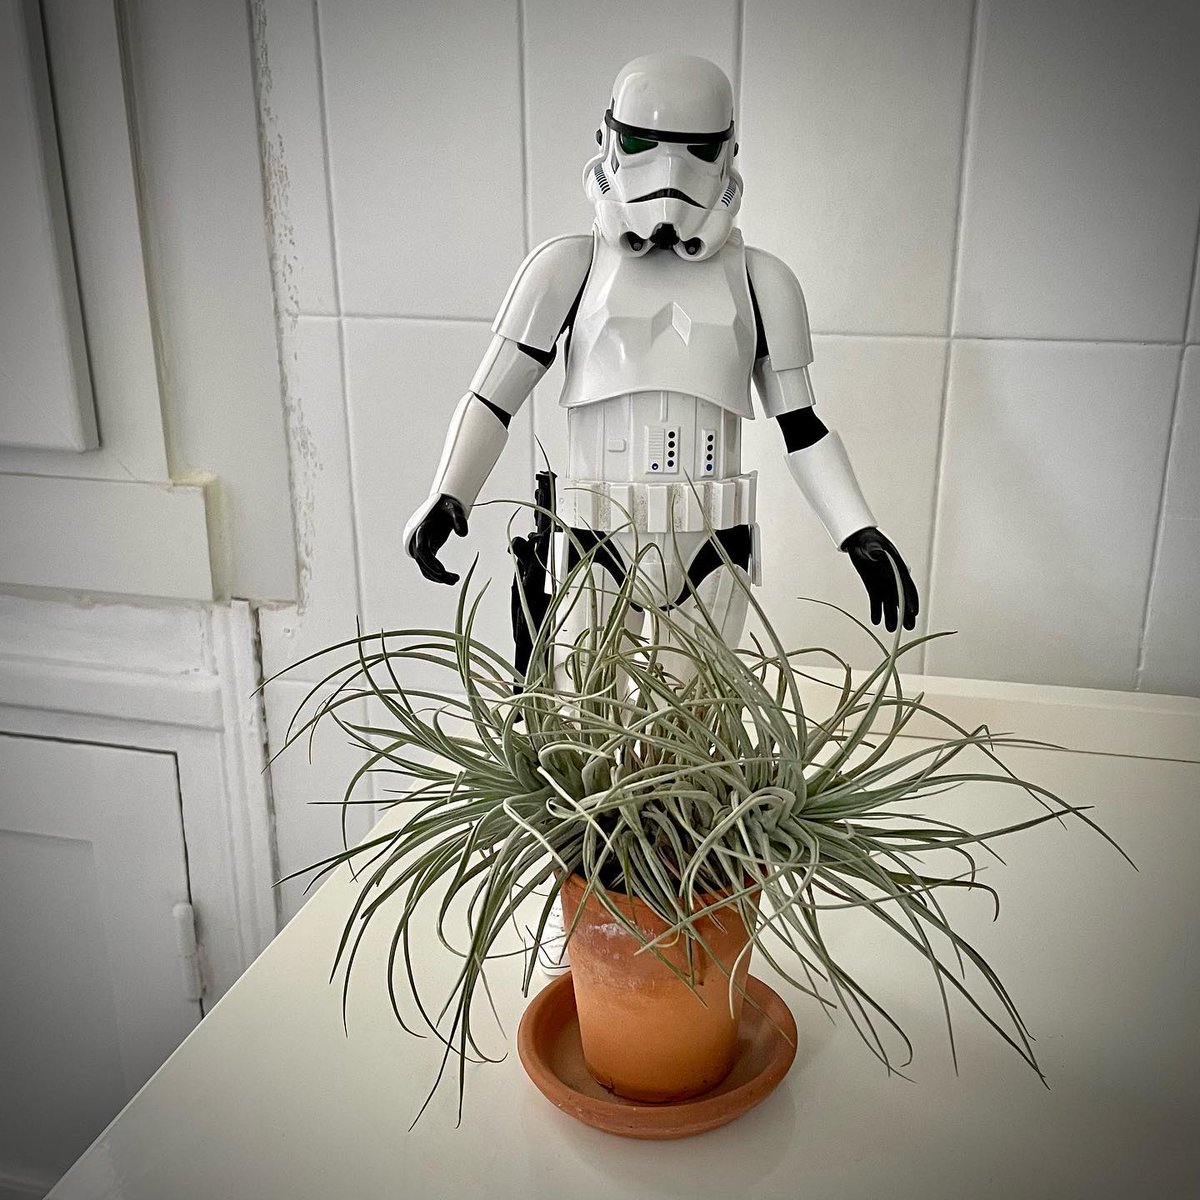 Une petite coupe ? 📷 #hairbeauty #tillandsia #stormy #stormtrooper #starwars #disney #hottoys #toy #toystory #toystagram #toyphotography #actionfigures